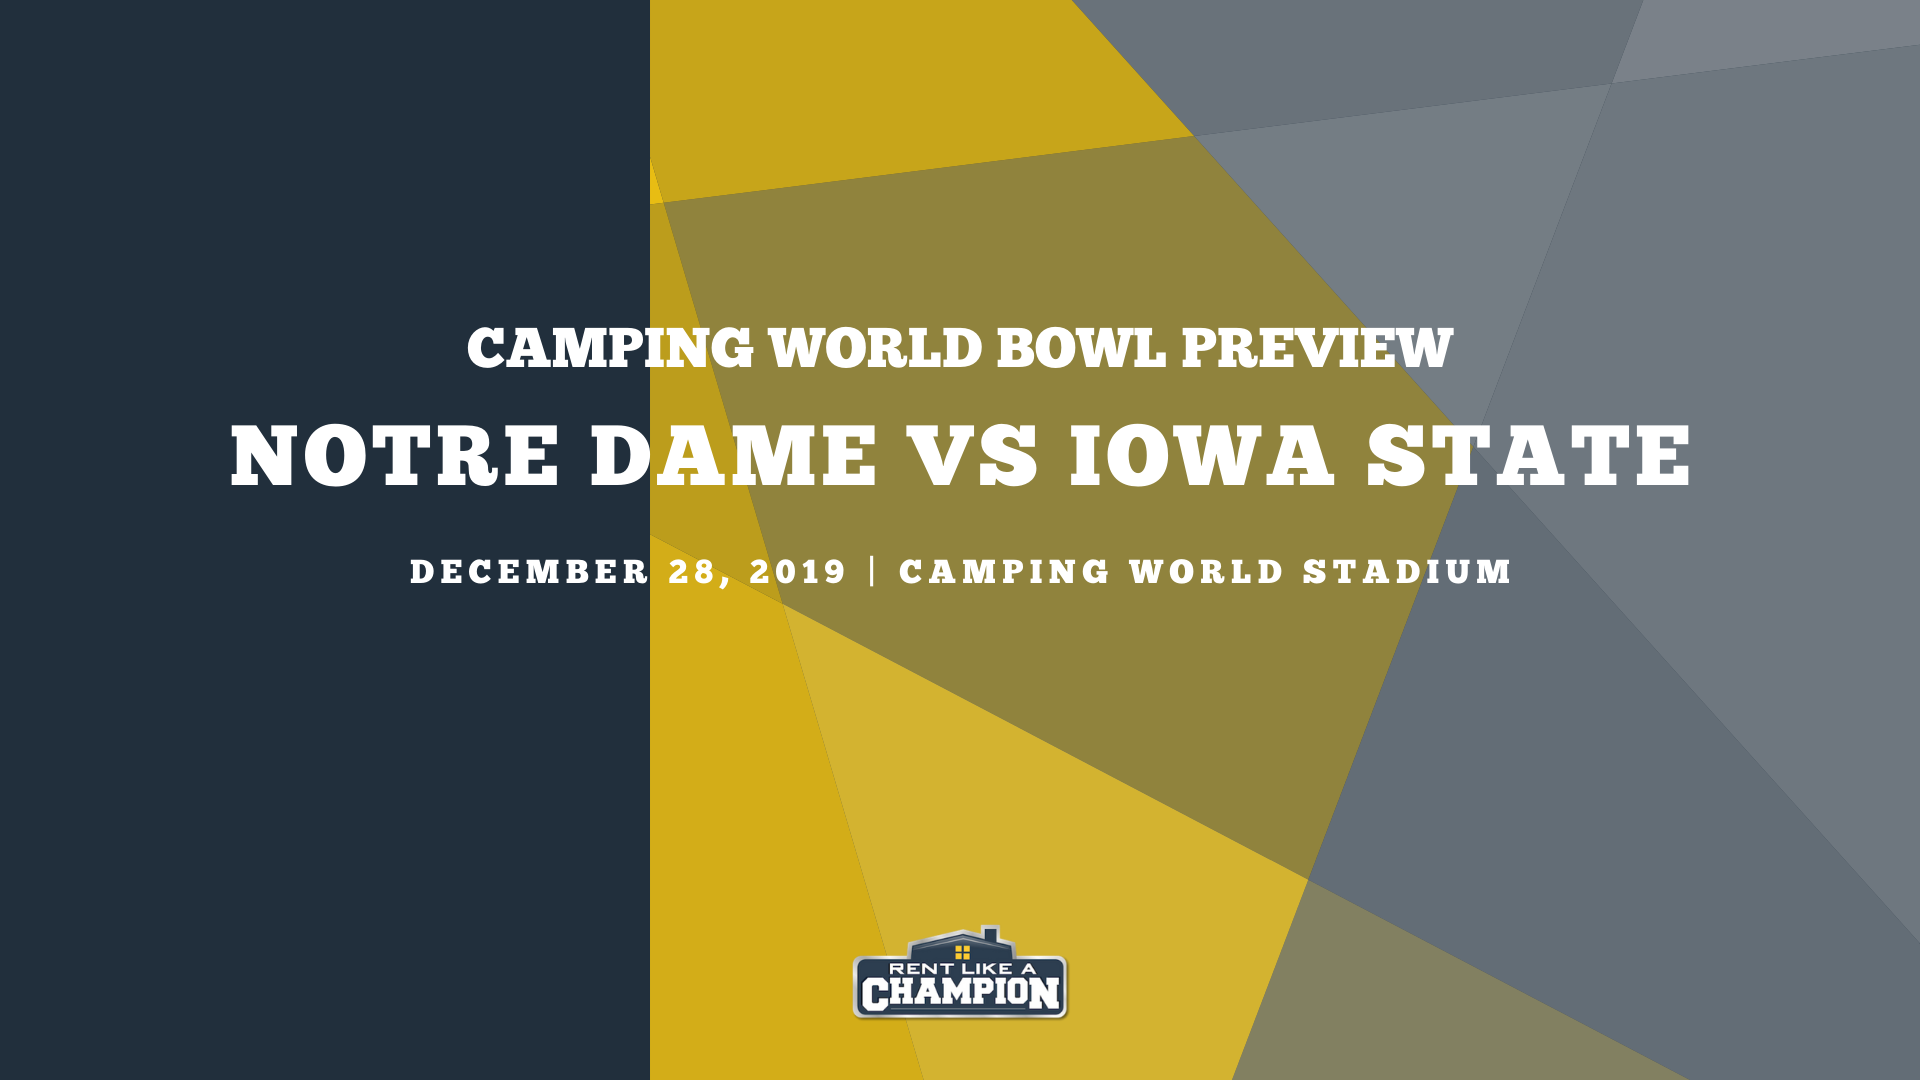 Camping World Bowl Preview: Notre Dame and Iowa State clash in Orlando